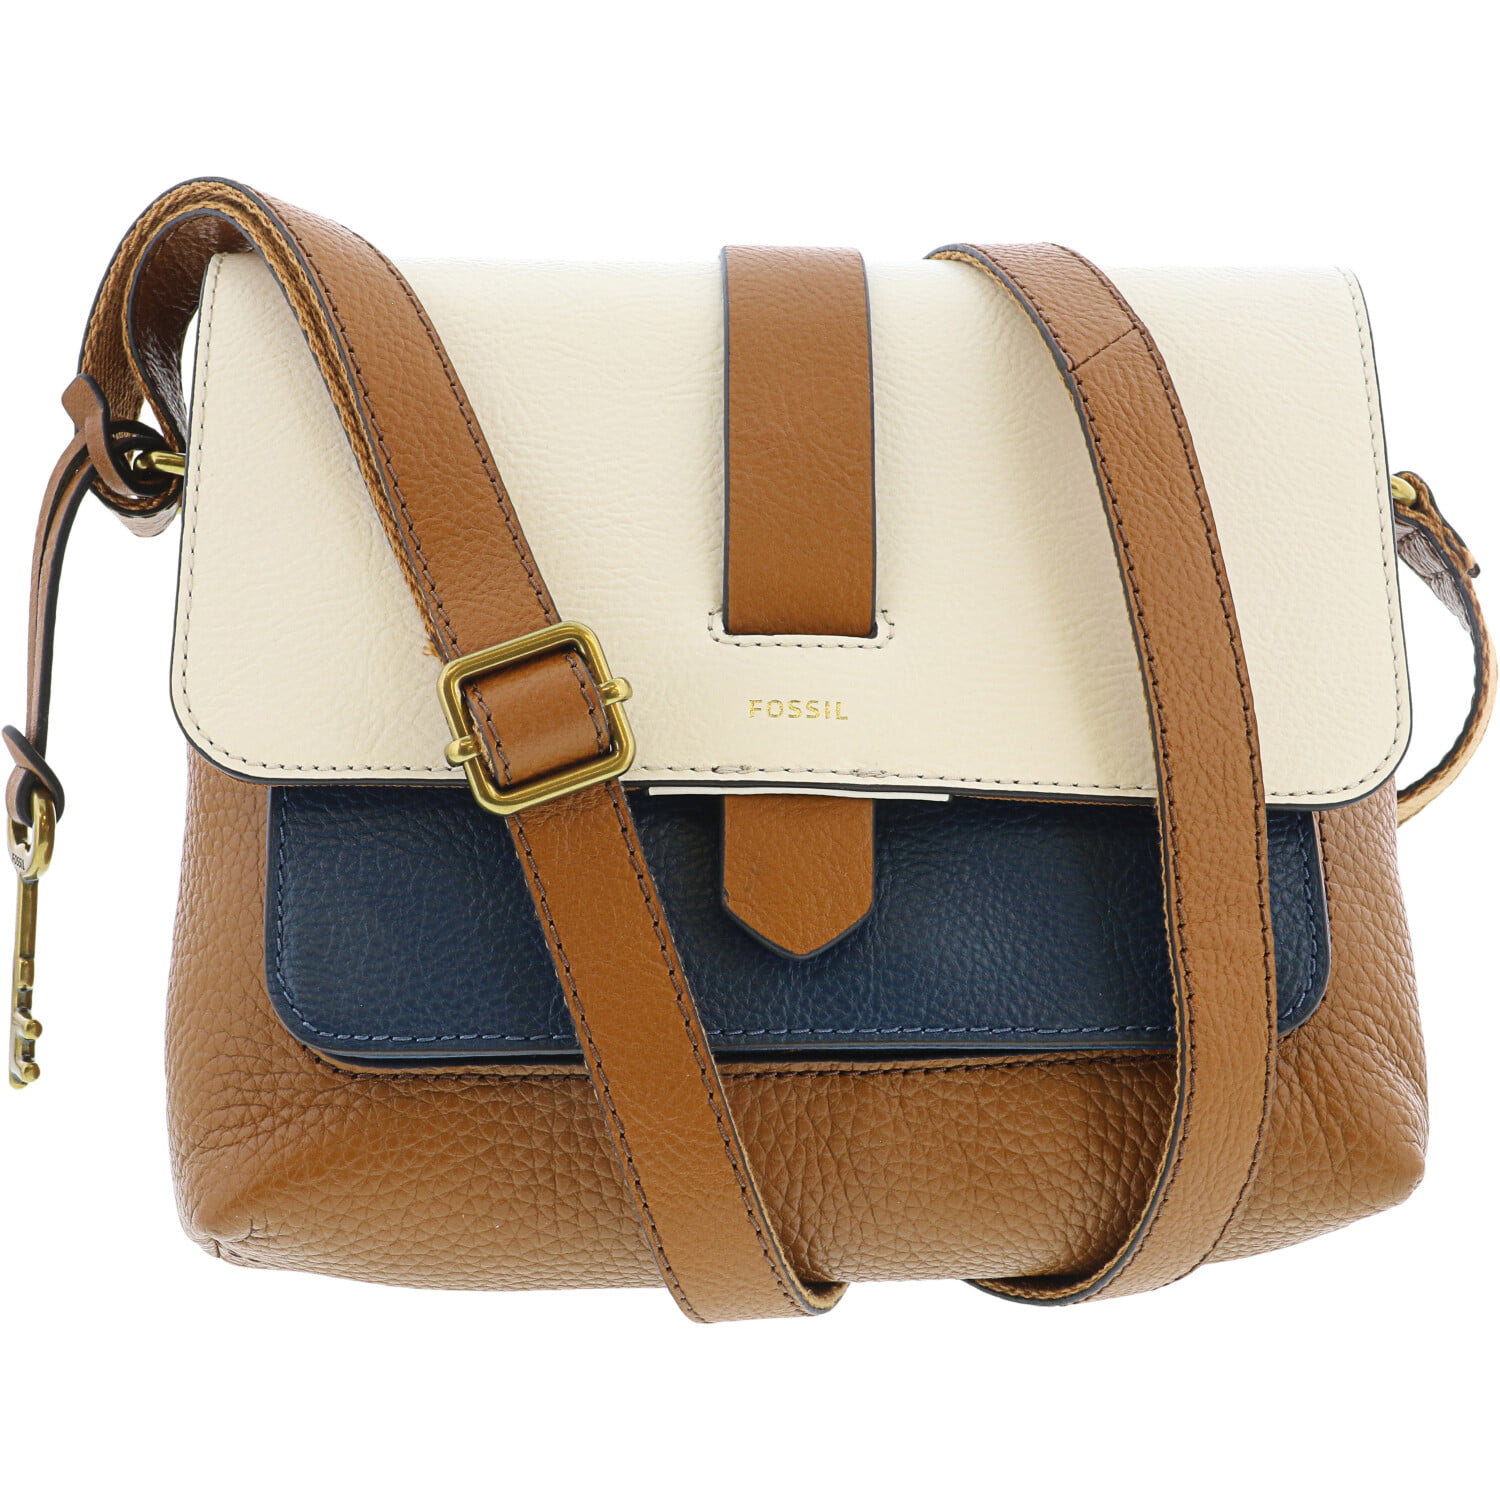 Fossil - Fossil Women's Kinley Small Colorblocked Crossbody Leather Cross Body Bag - Neutral 